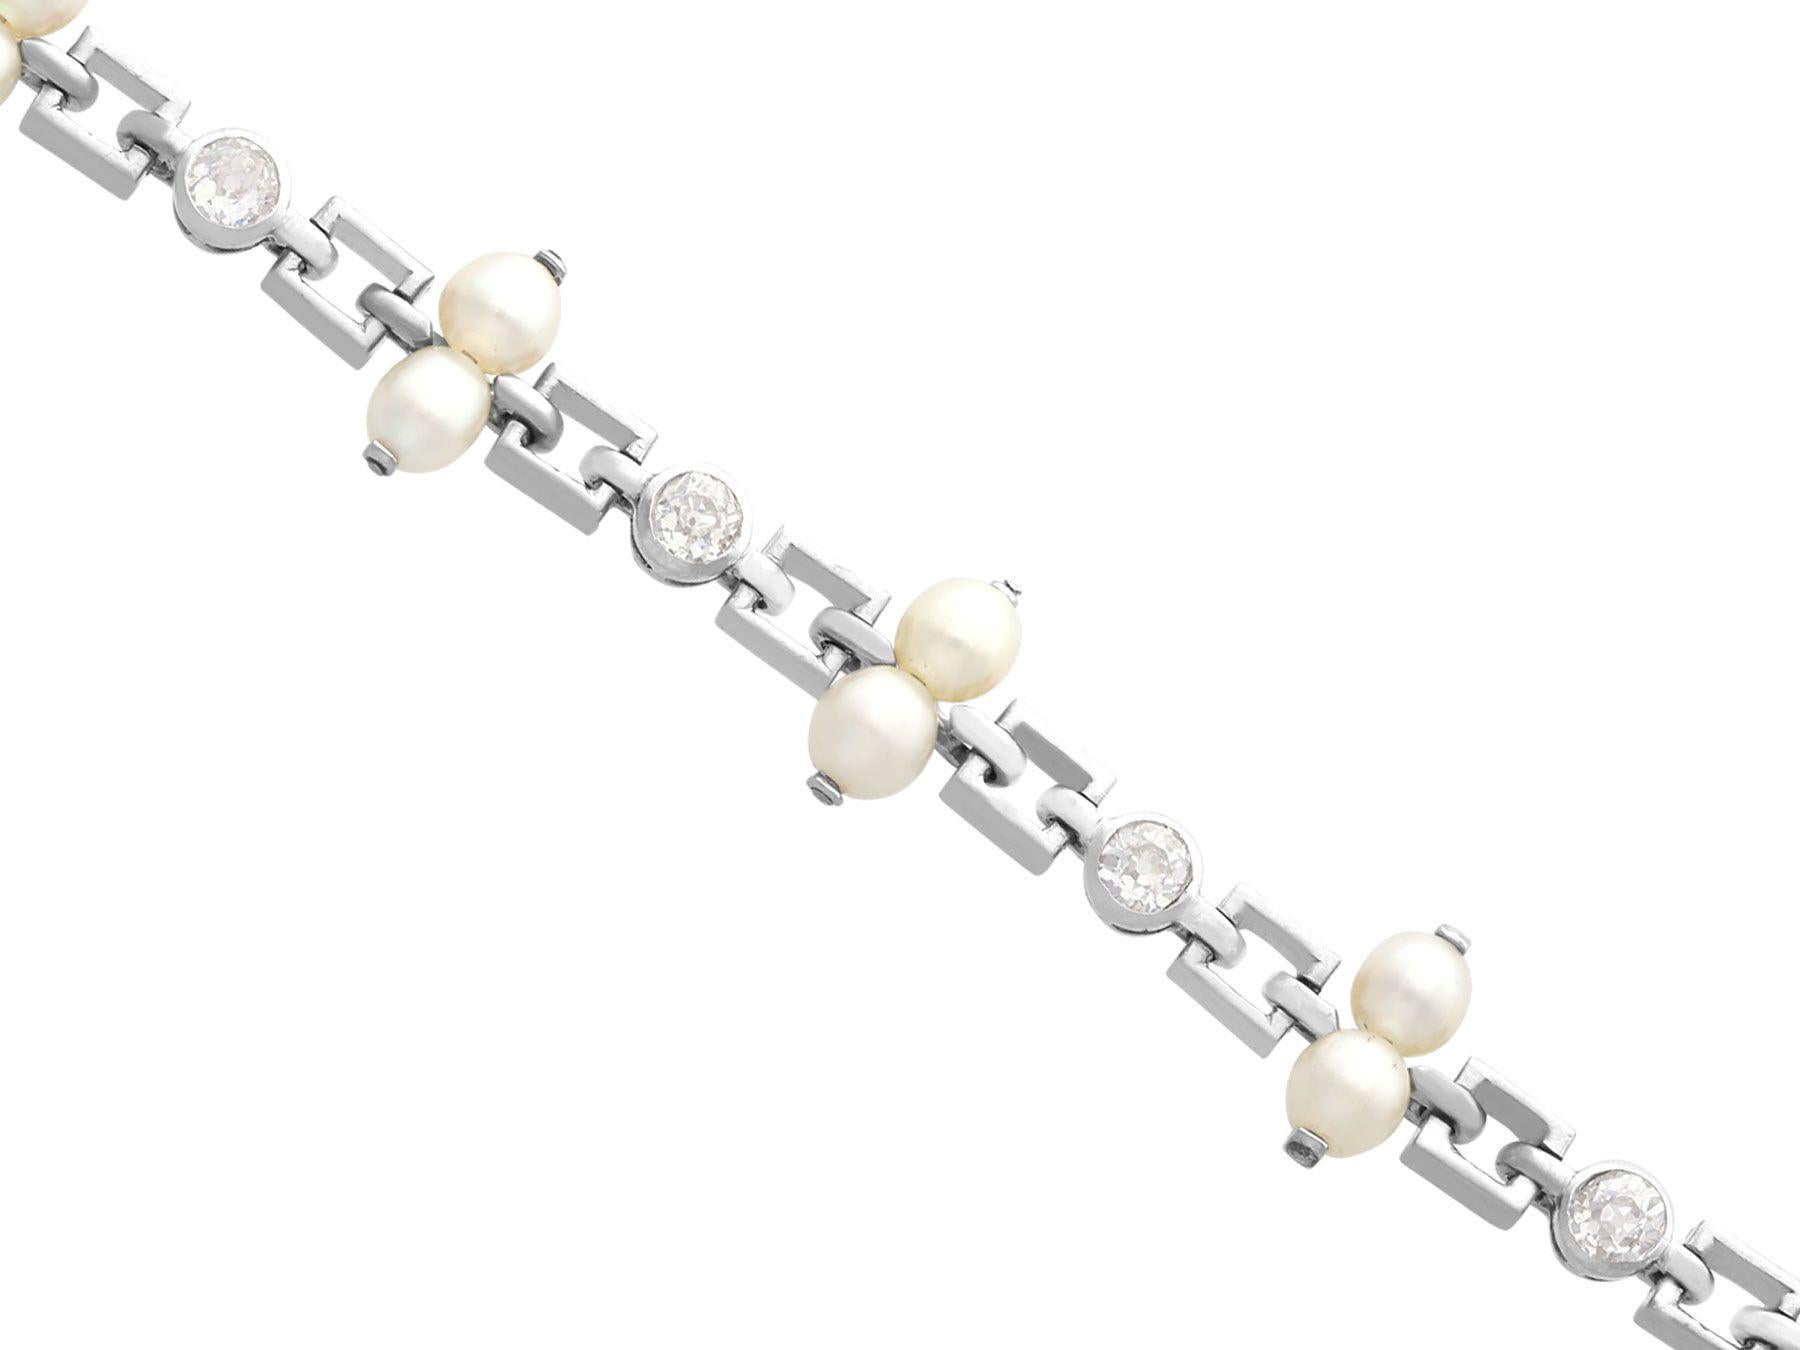 An exceptional, fine and impressive vintage 0.82 carat diamond and natural pearl, platinum bracelet in the Art Deco style; part of our diverse vintage jewellery and estate jewelry collections.

This exceptional, fine and impressive vintage pearl and